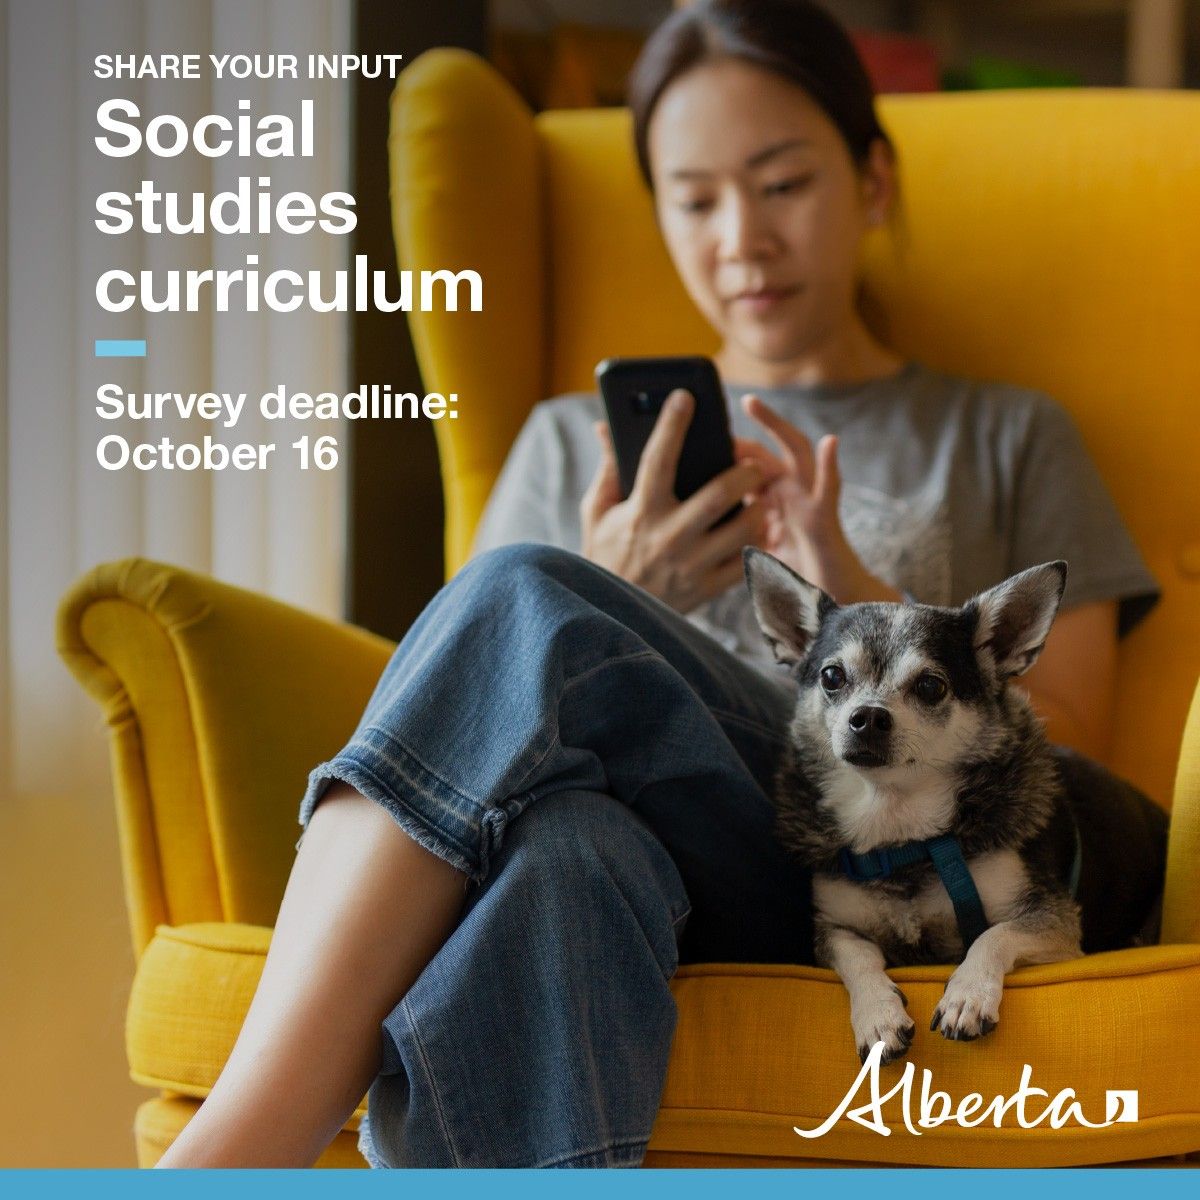 Until Oct. 16, you can share your thoughts on what you’d like students to learn in the #AbEd social studies curriculum at alberta.ca/curriculum-hav…. Survey results will be used to inform draft curriculum before it’s released for further engagement.